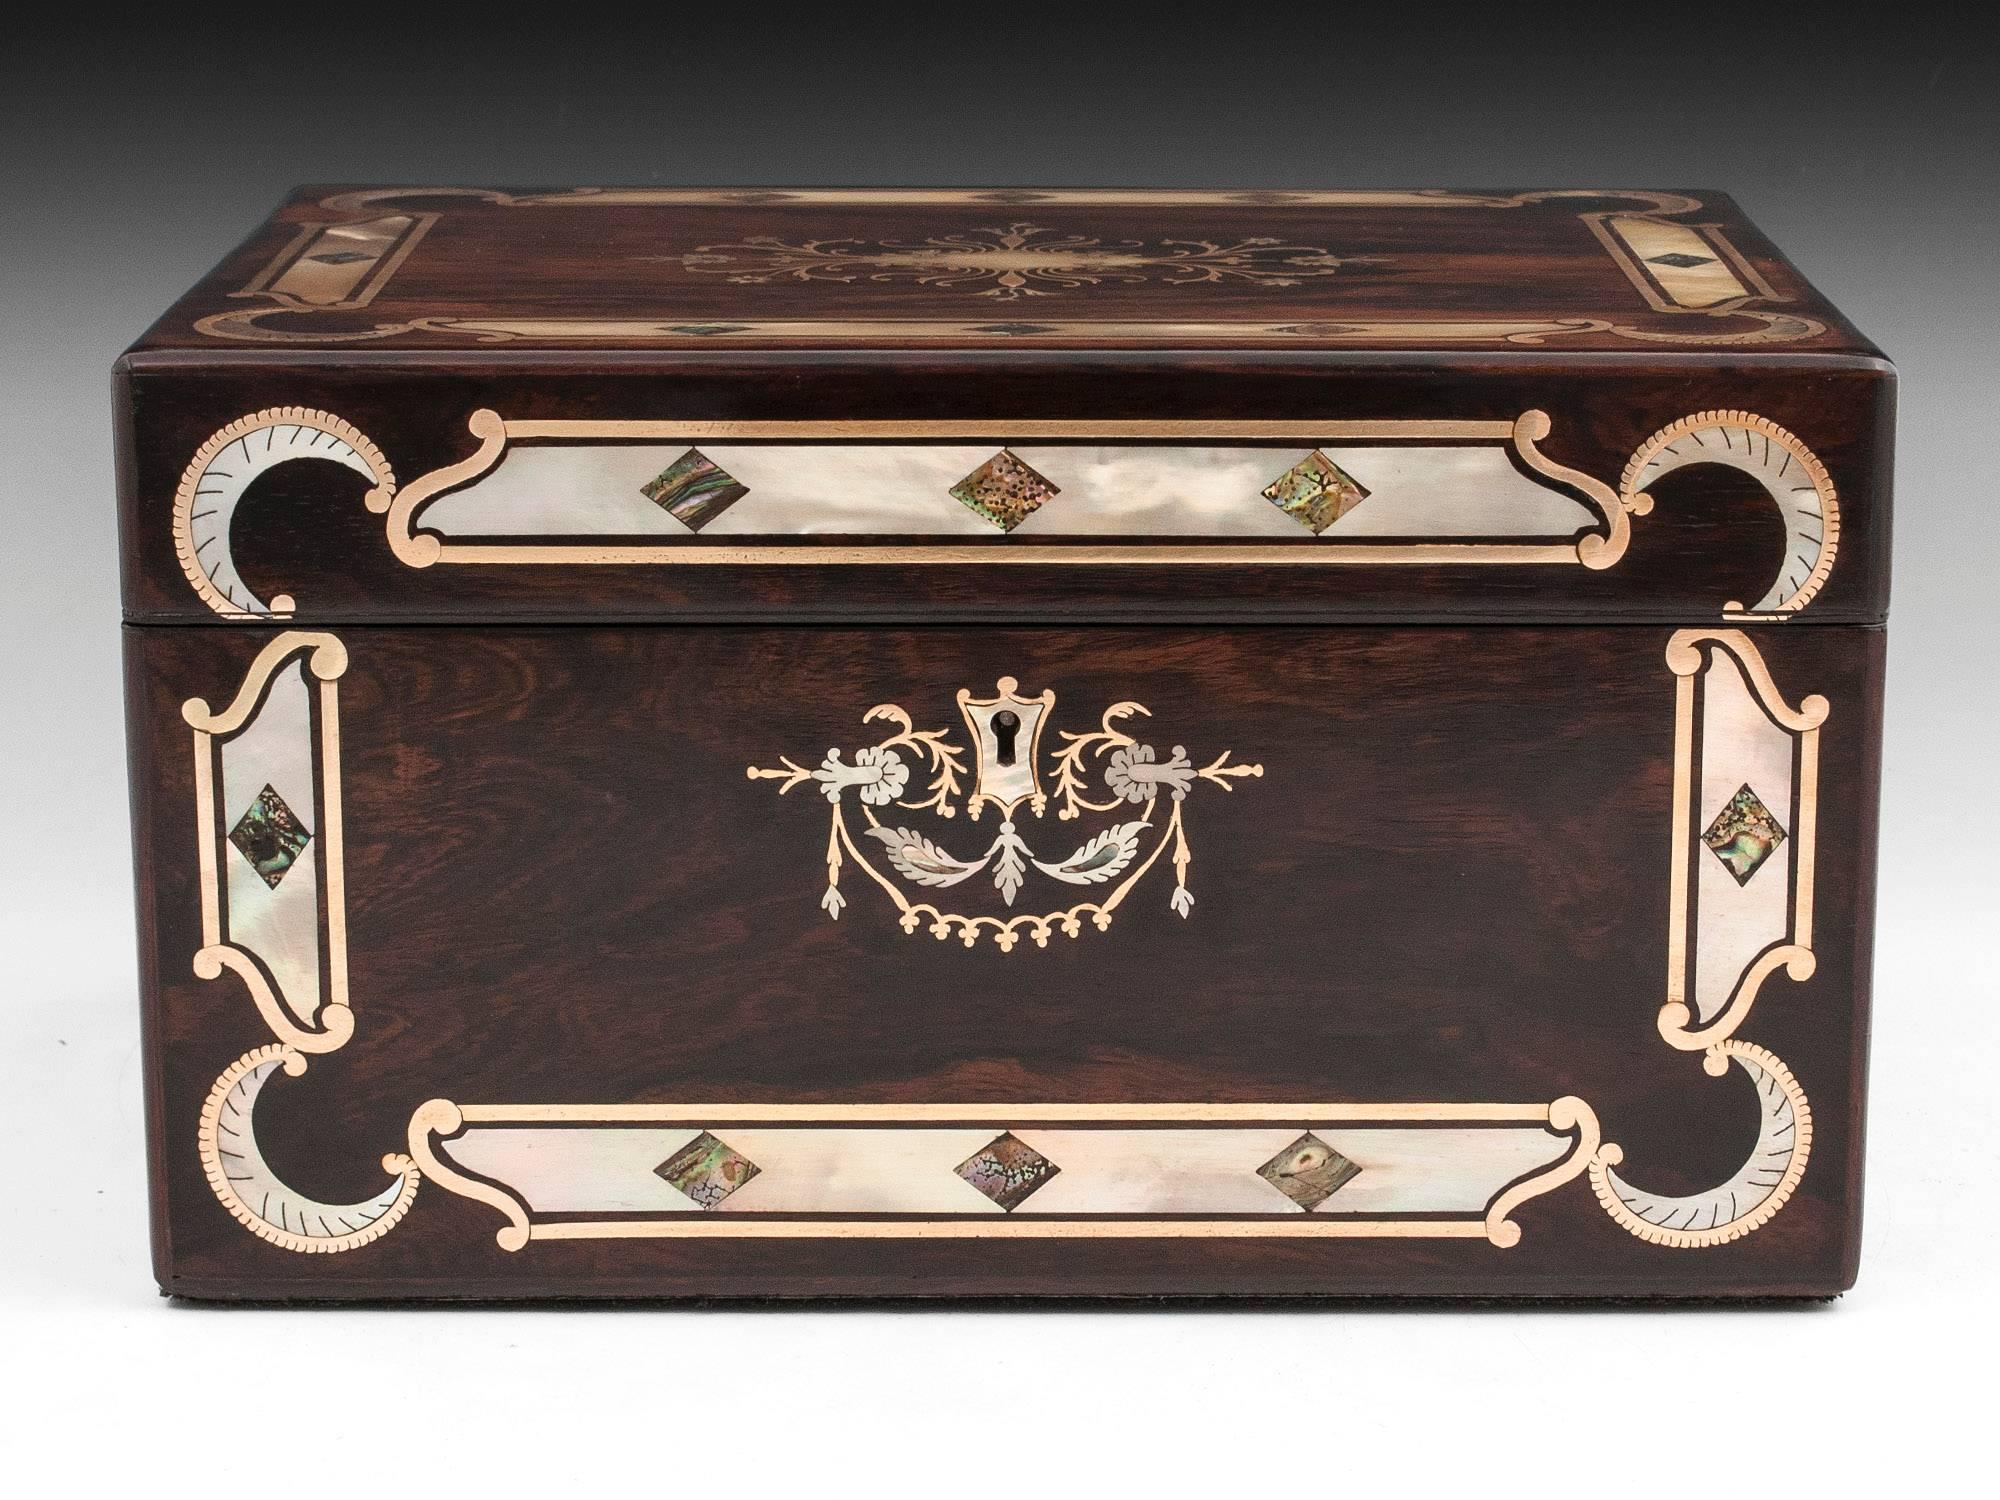 Exquisite antique rosewood jewelry box with inlaid mother-of-pearl with abalone diamonds framed with thick strips of brass. The escutcheon and initial plate have intricate floral inlay and delicate swags of brass, mother-of-pearl and Abalone.

The